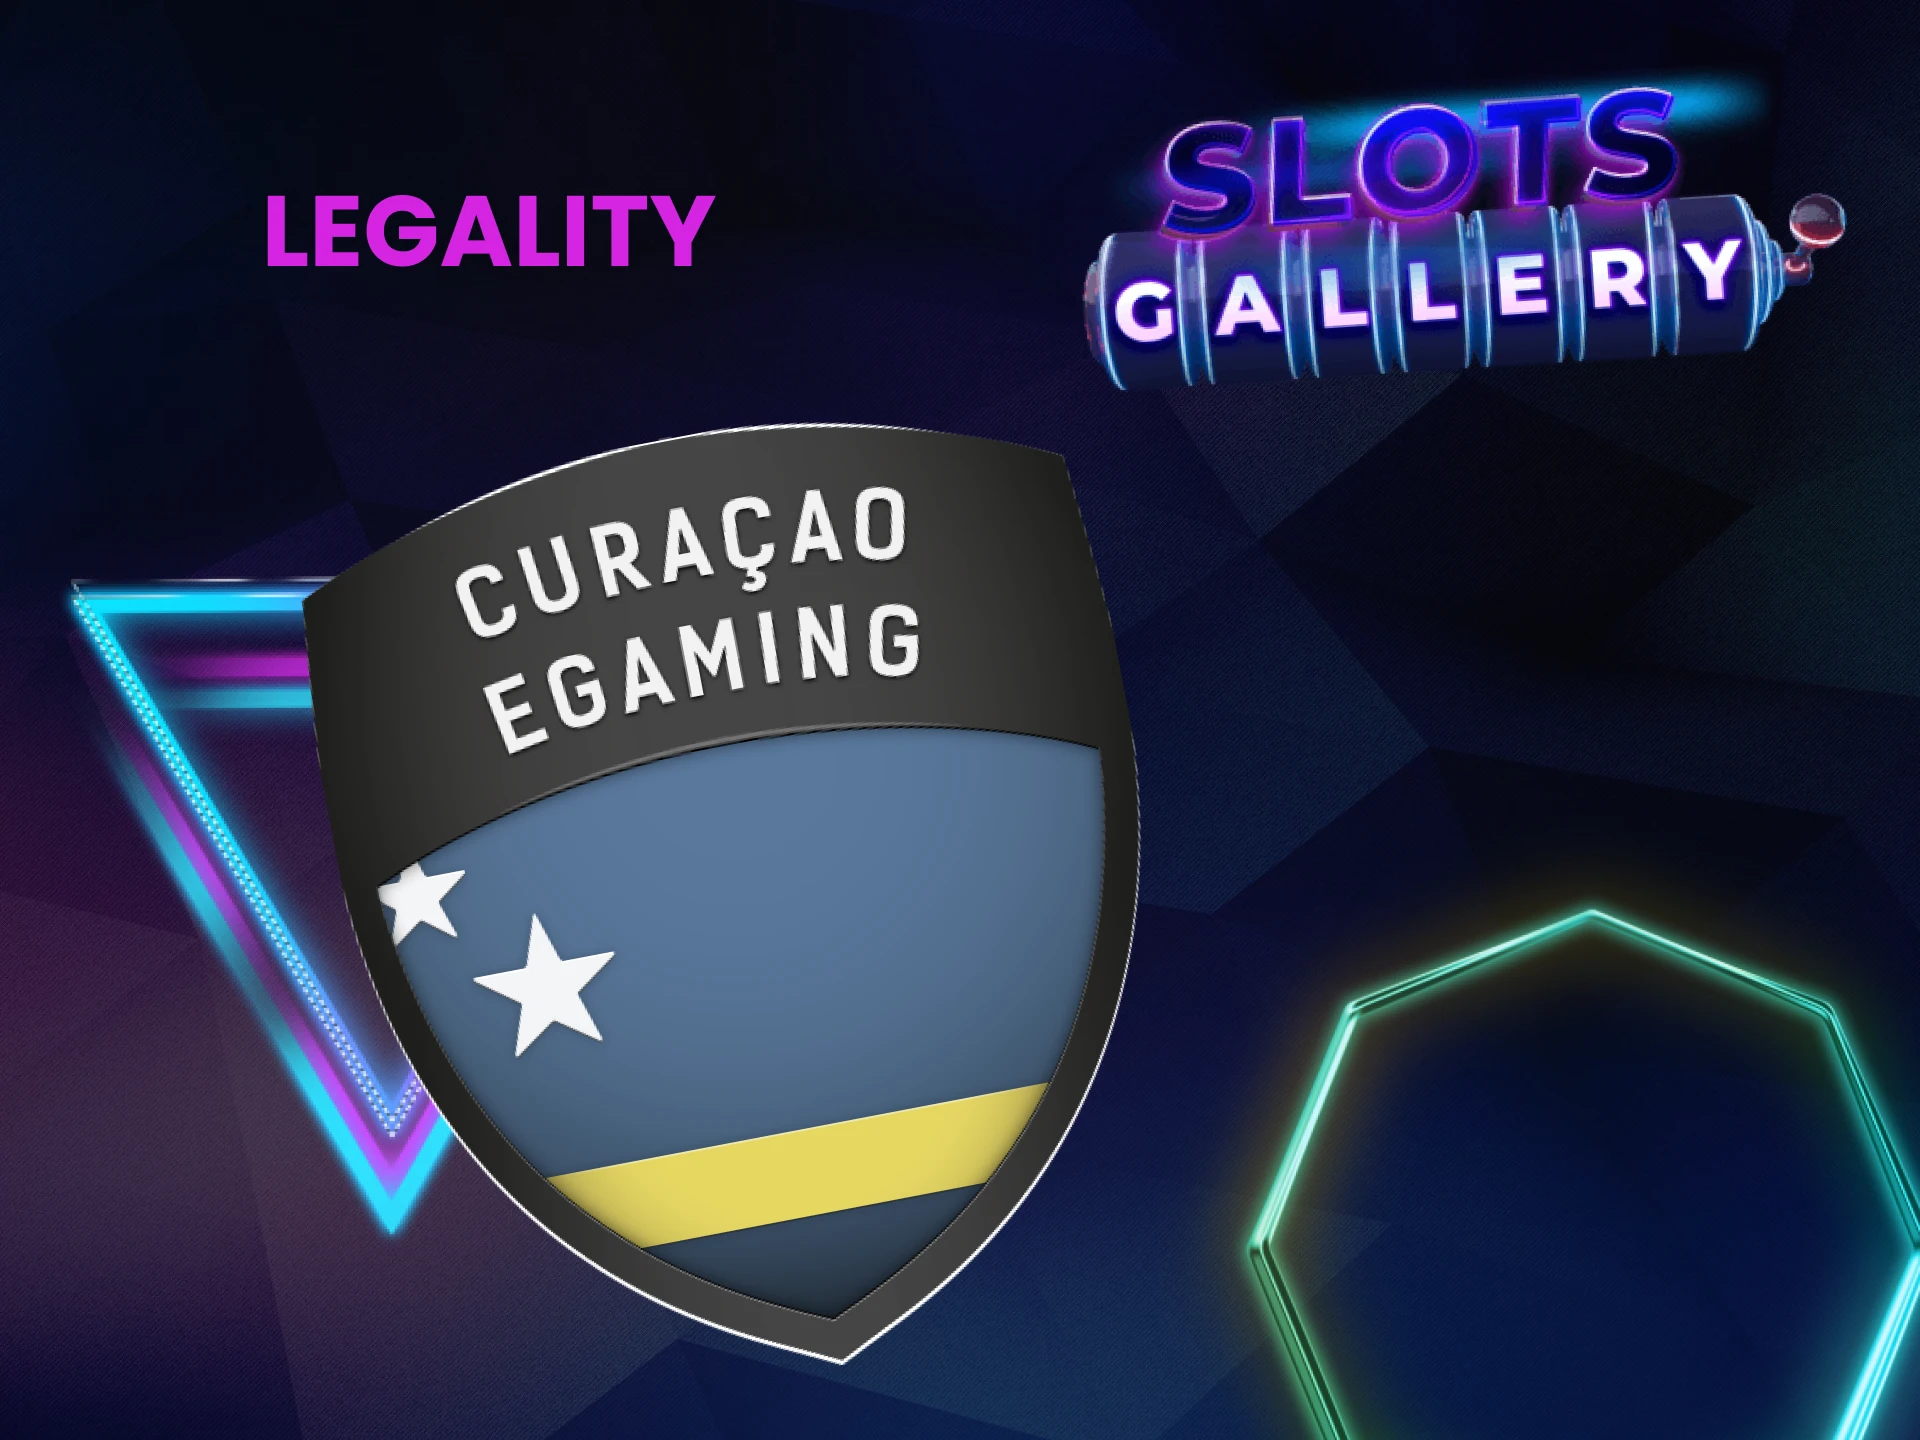 Slots Gallery is an absolutely legit gaming site.